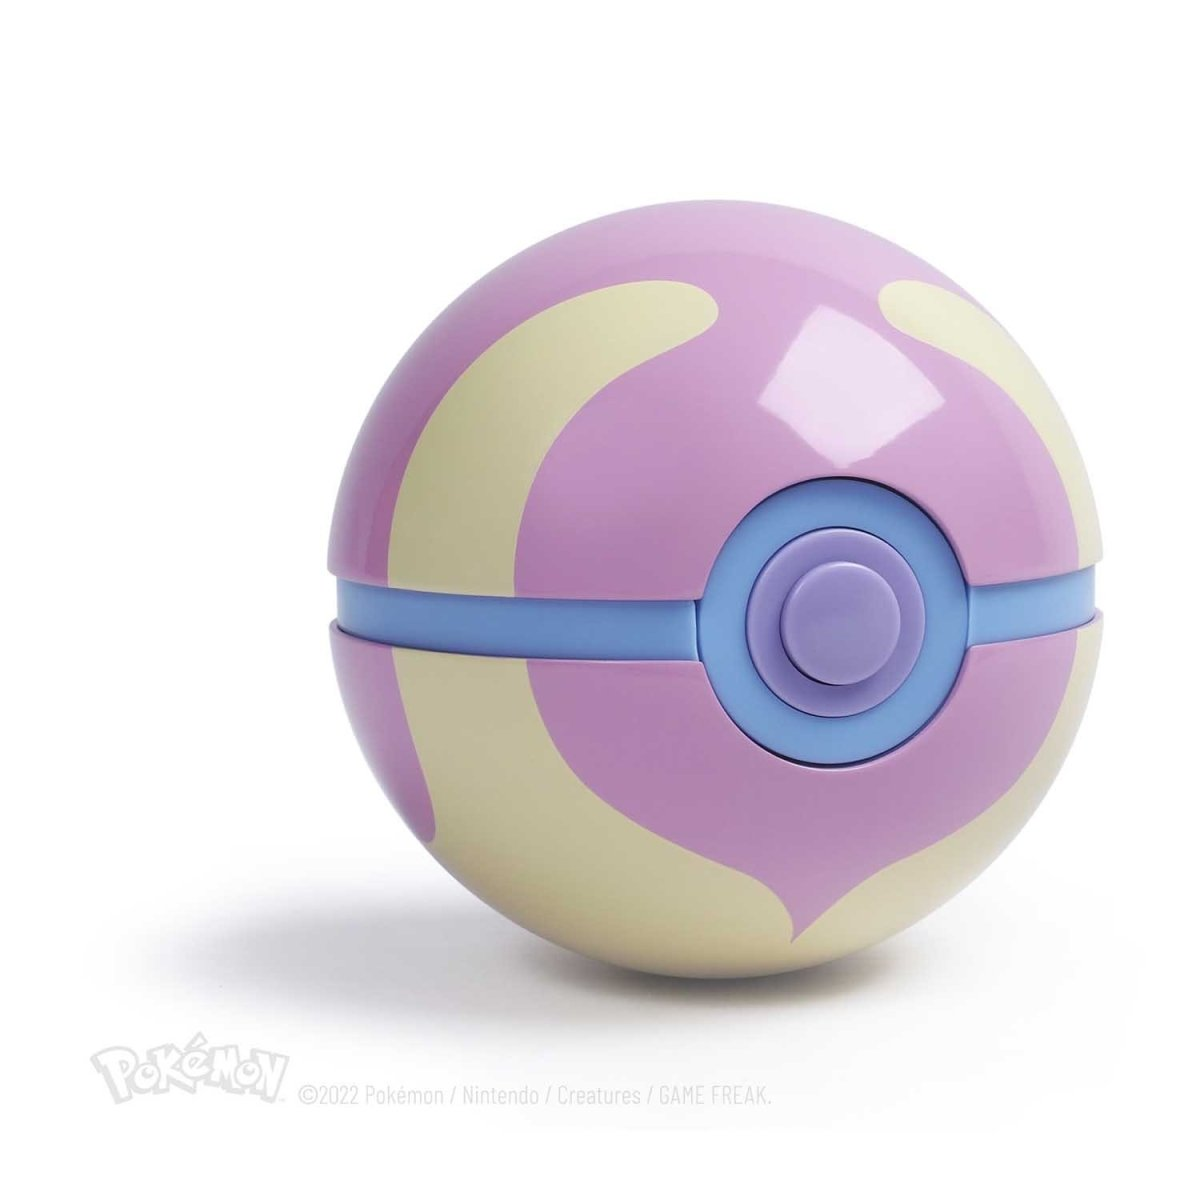 Heal Ball By The Wand Company-Pokemon Centre-Ace Cards &amp; Collectibles